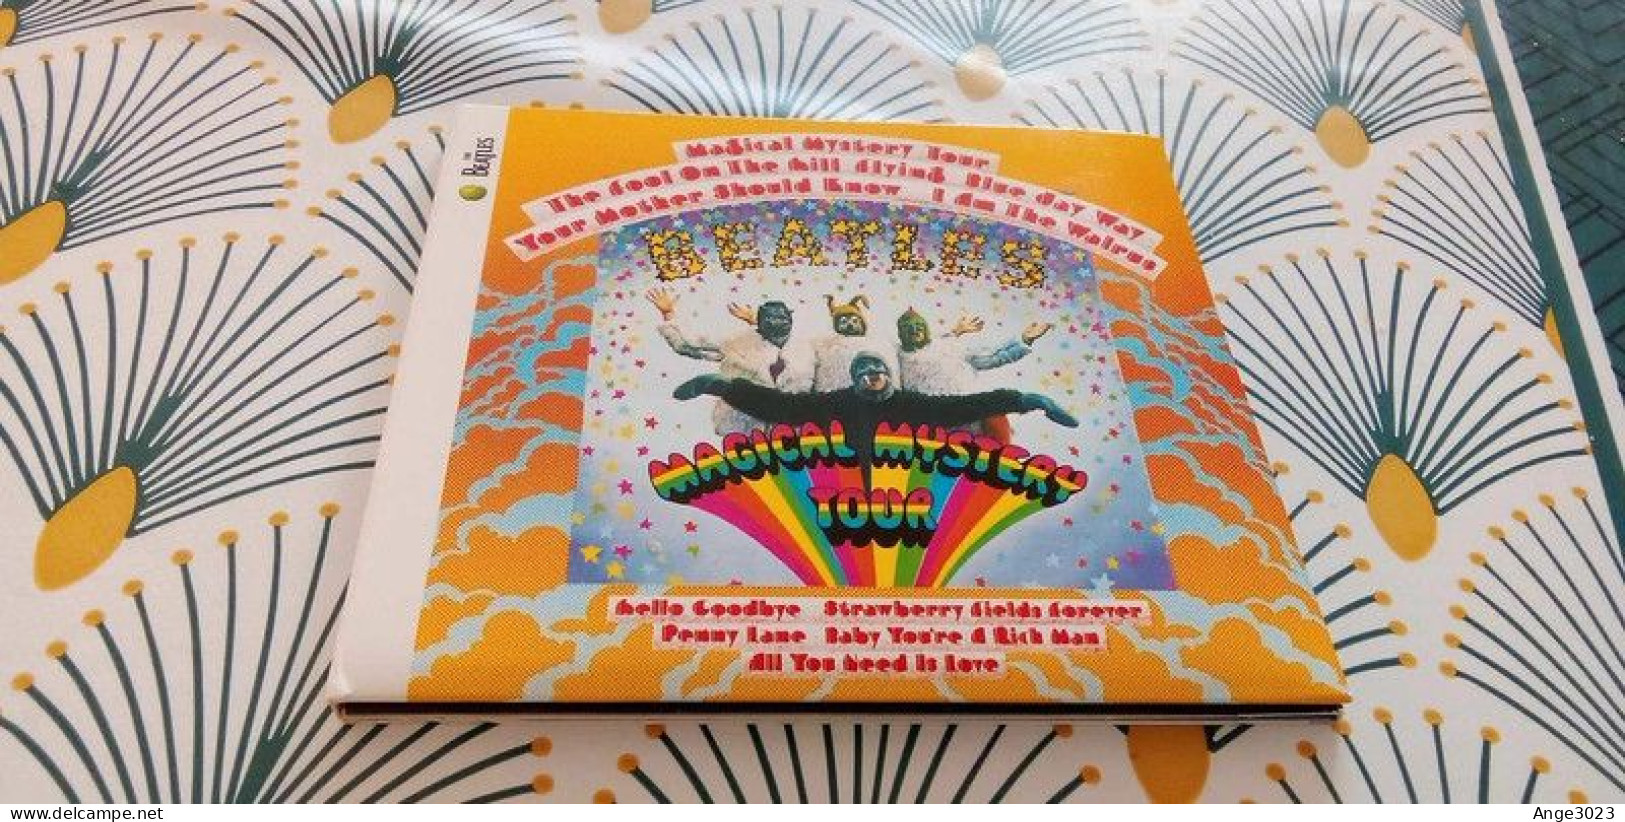 THE BEATLES "Magical Mystery Tour" - Rock